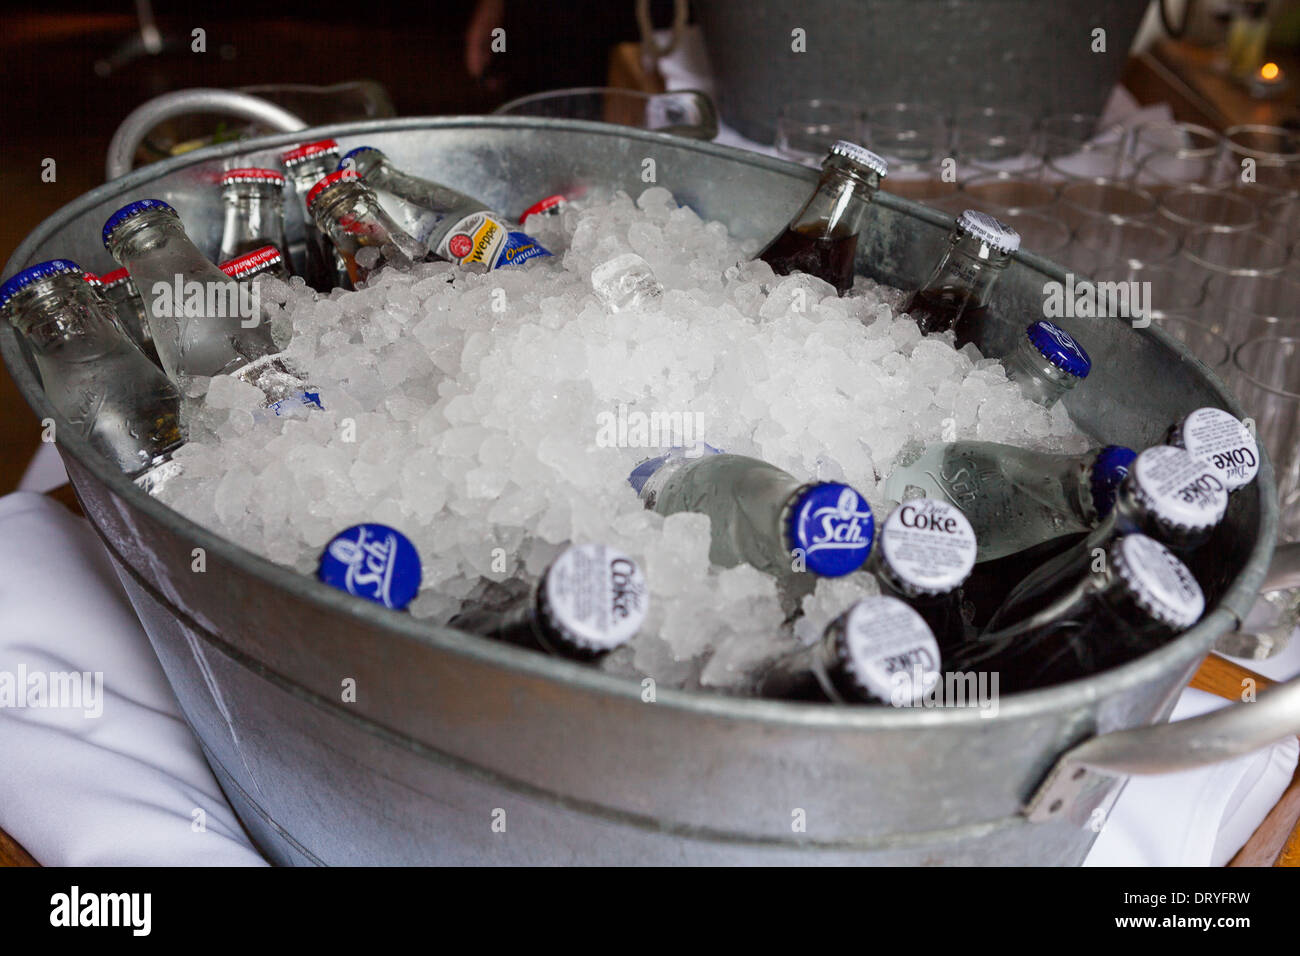 Drink chilled in a bucket of ice Stock Photo